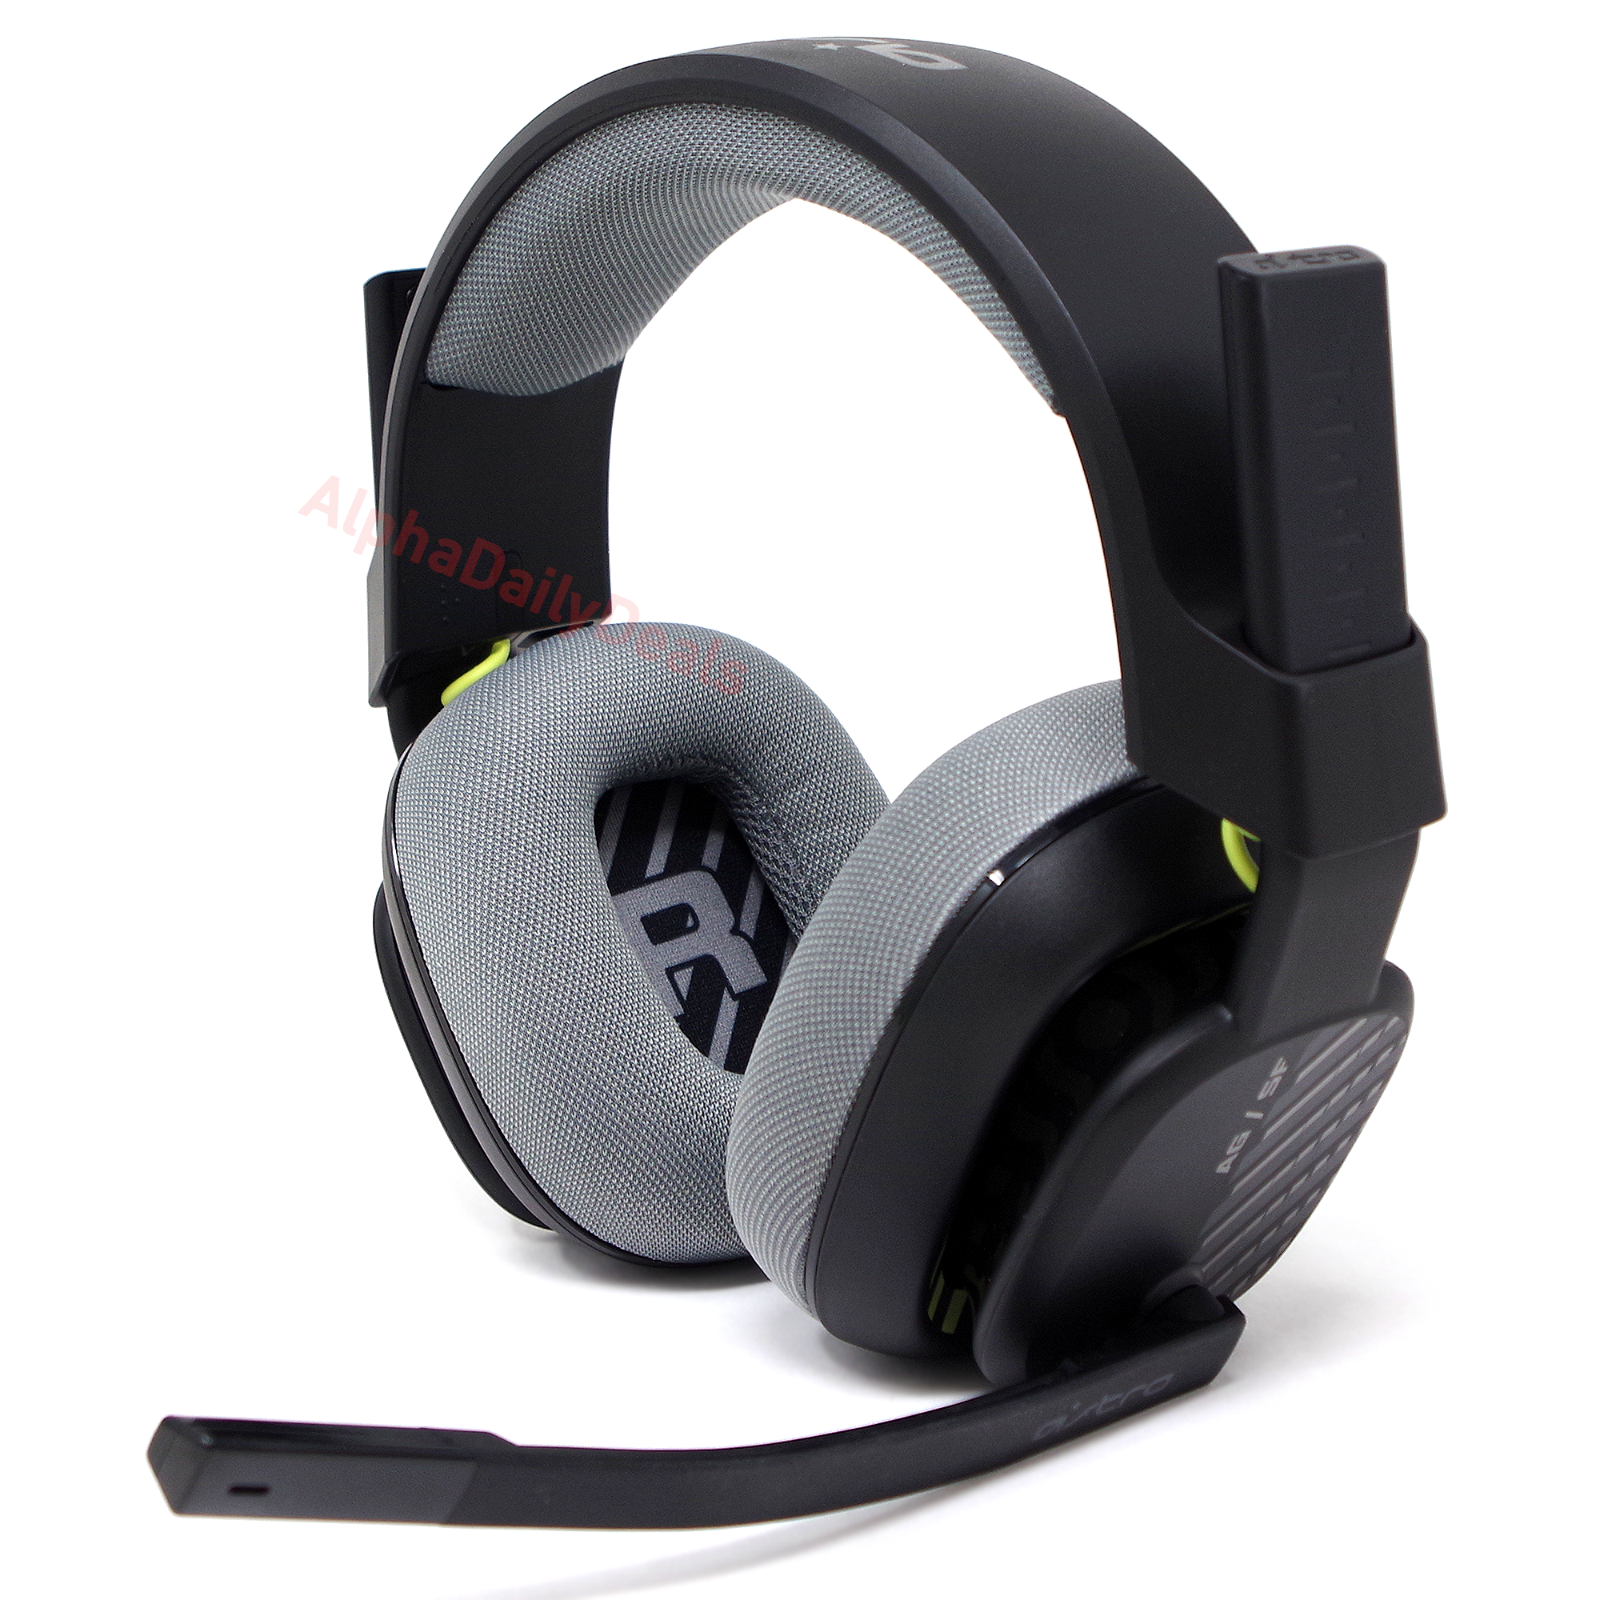 ASTRO A10 Gen 2 Wired Gaming Headset with Boom Mic Xbox One Series X|S PC Mac